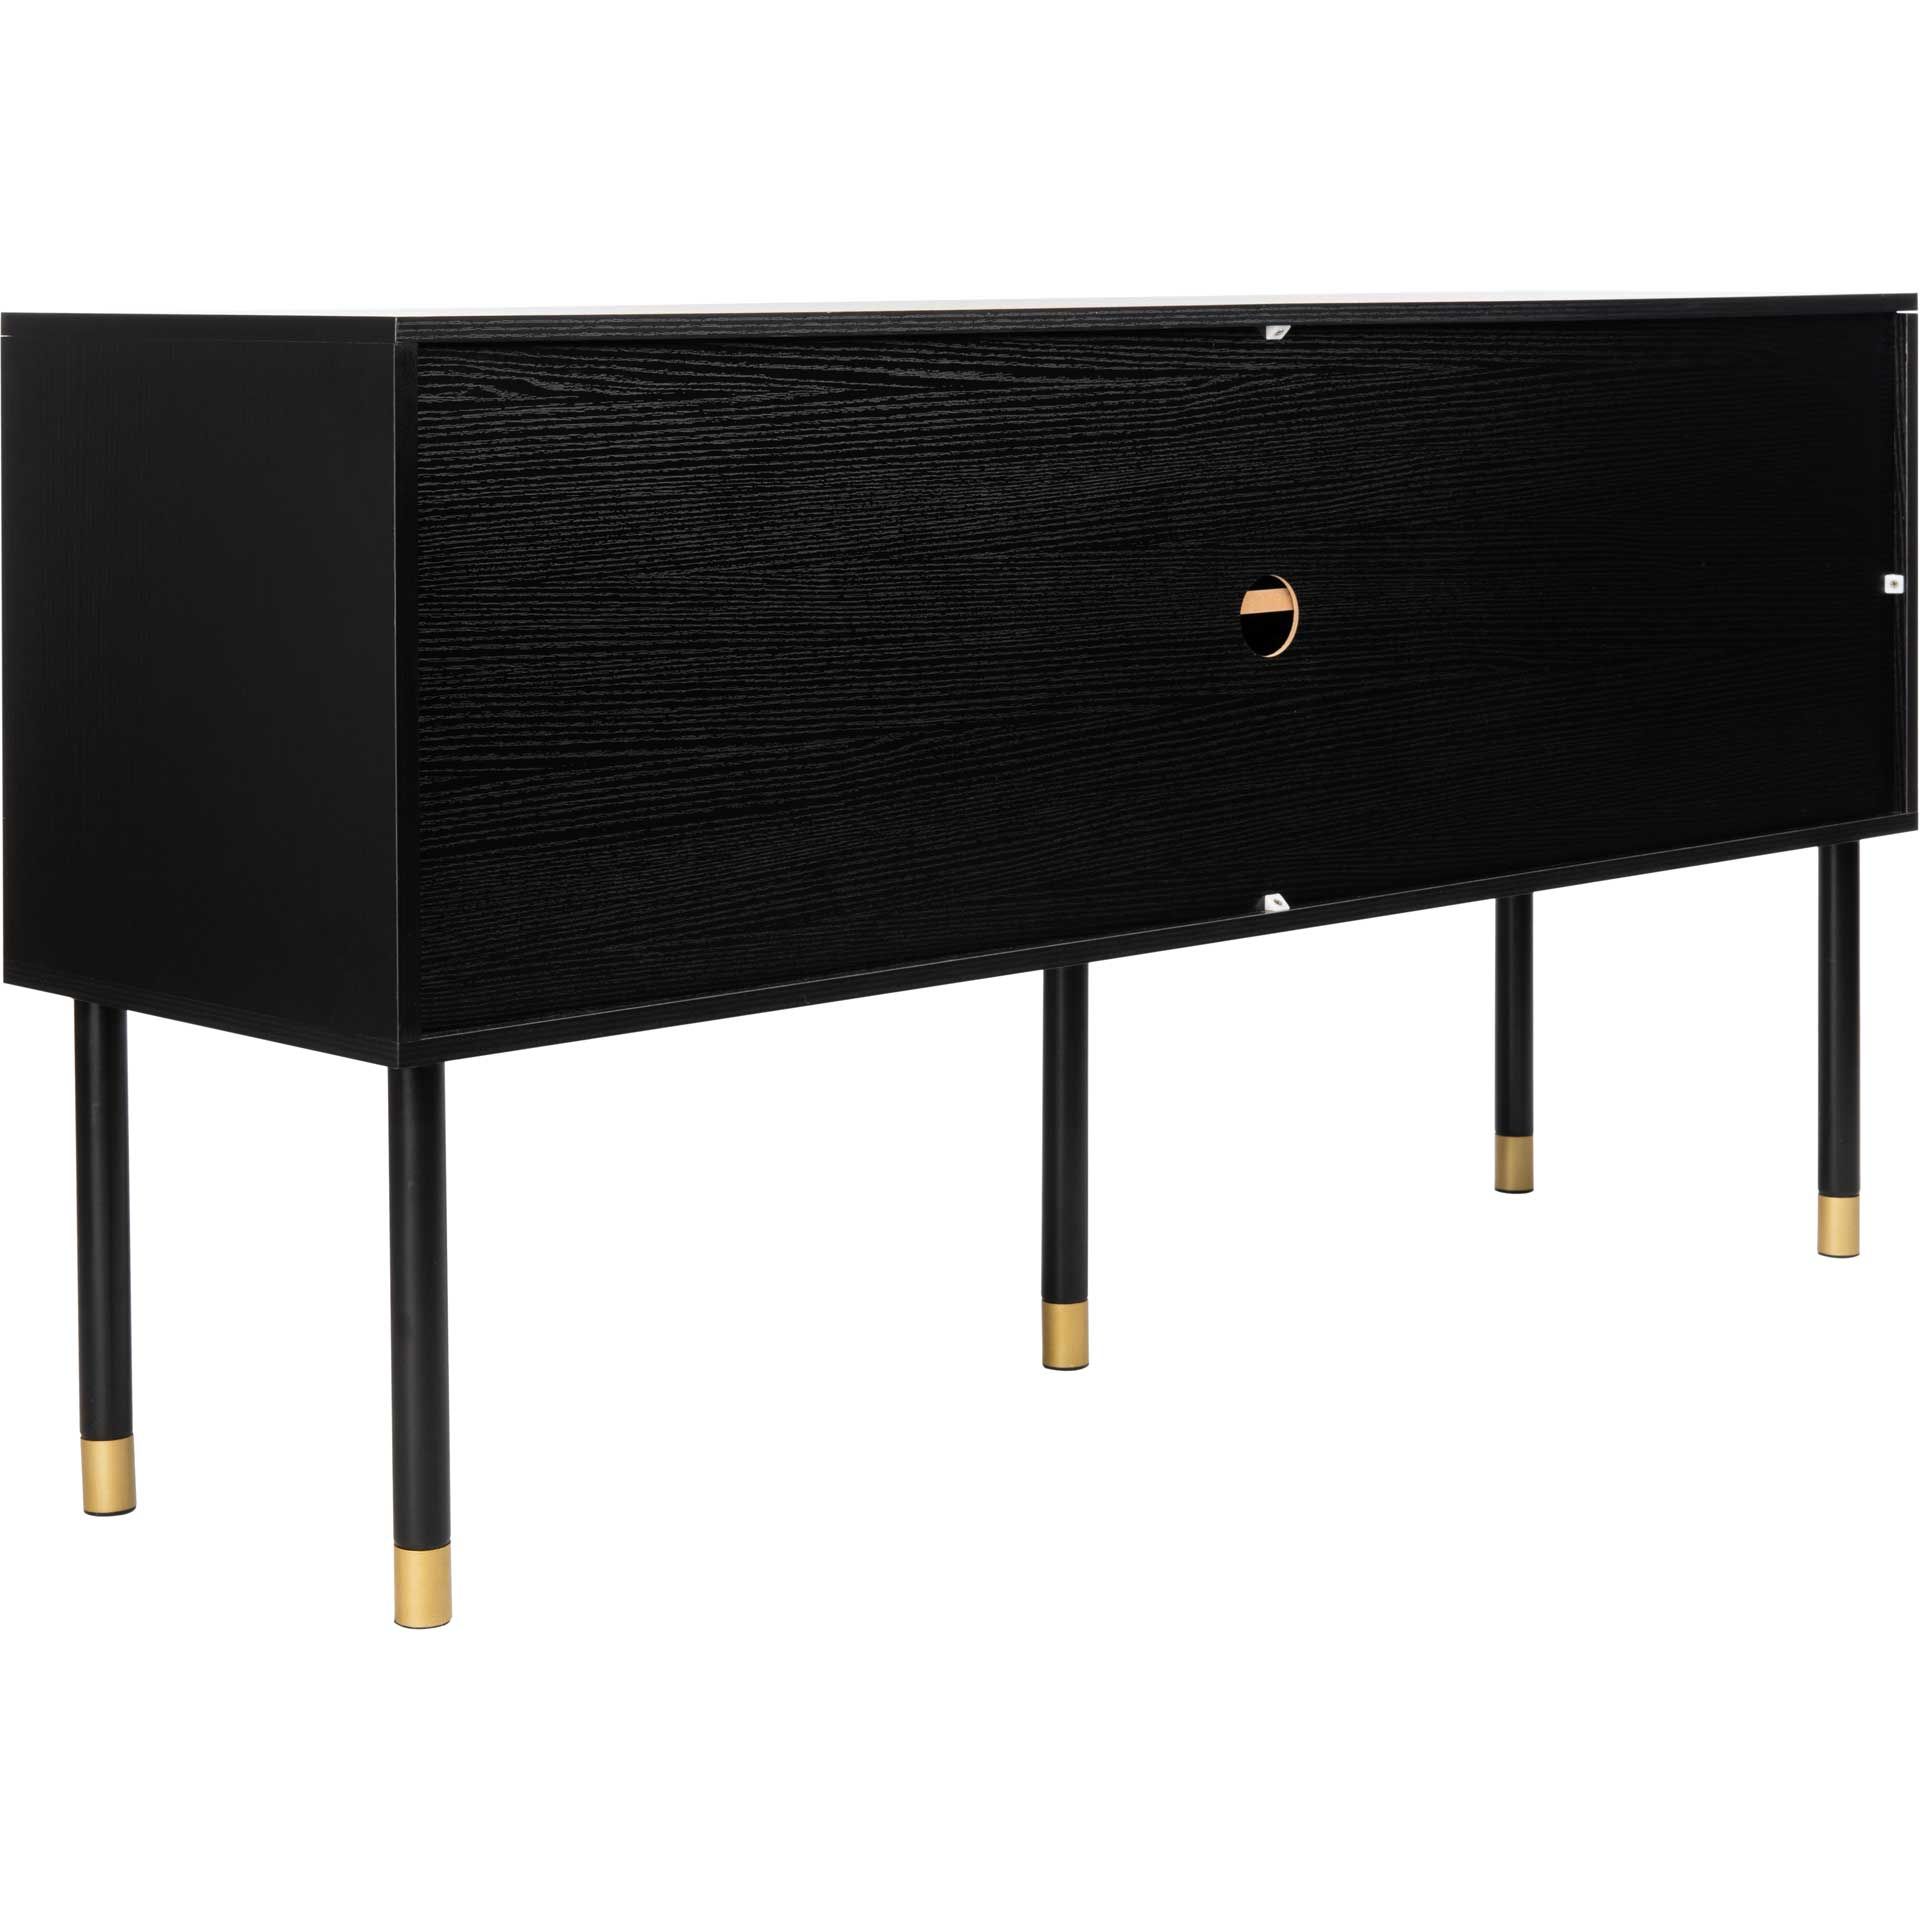 Oaklee Tv Stand Black/white/gold – Froy Throughout Oaklee Tv Stands (View 3 of 20)